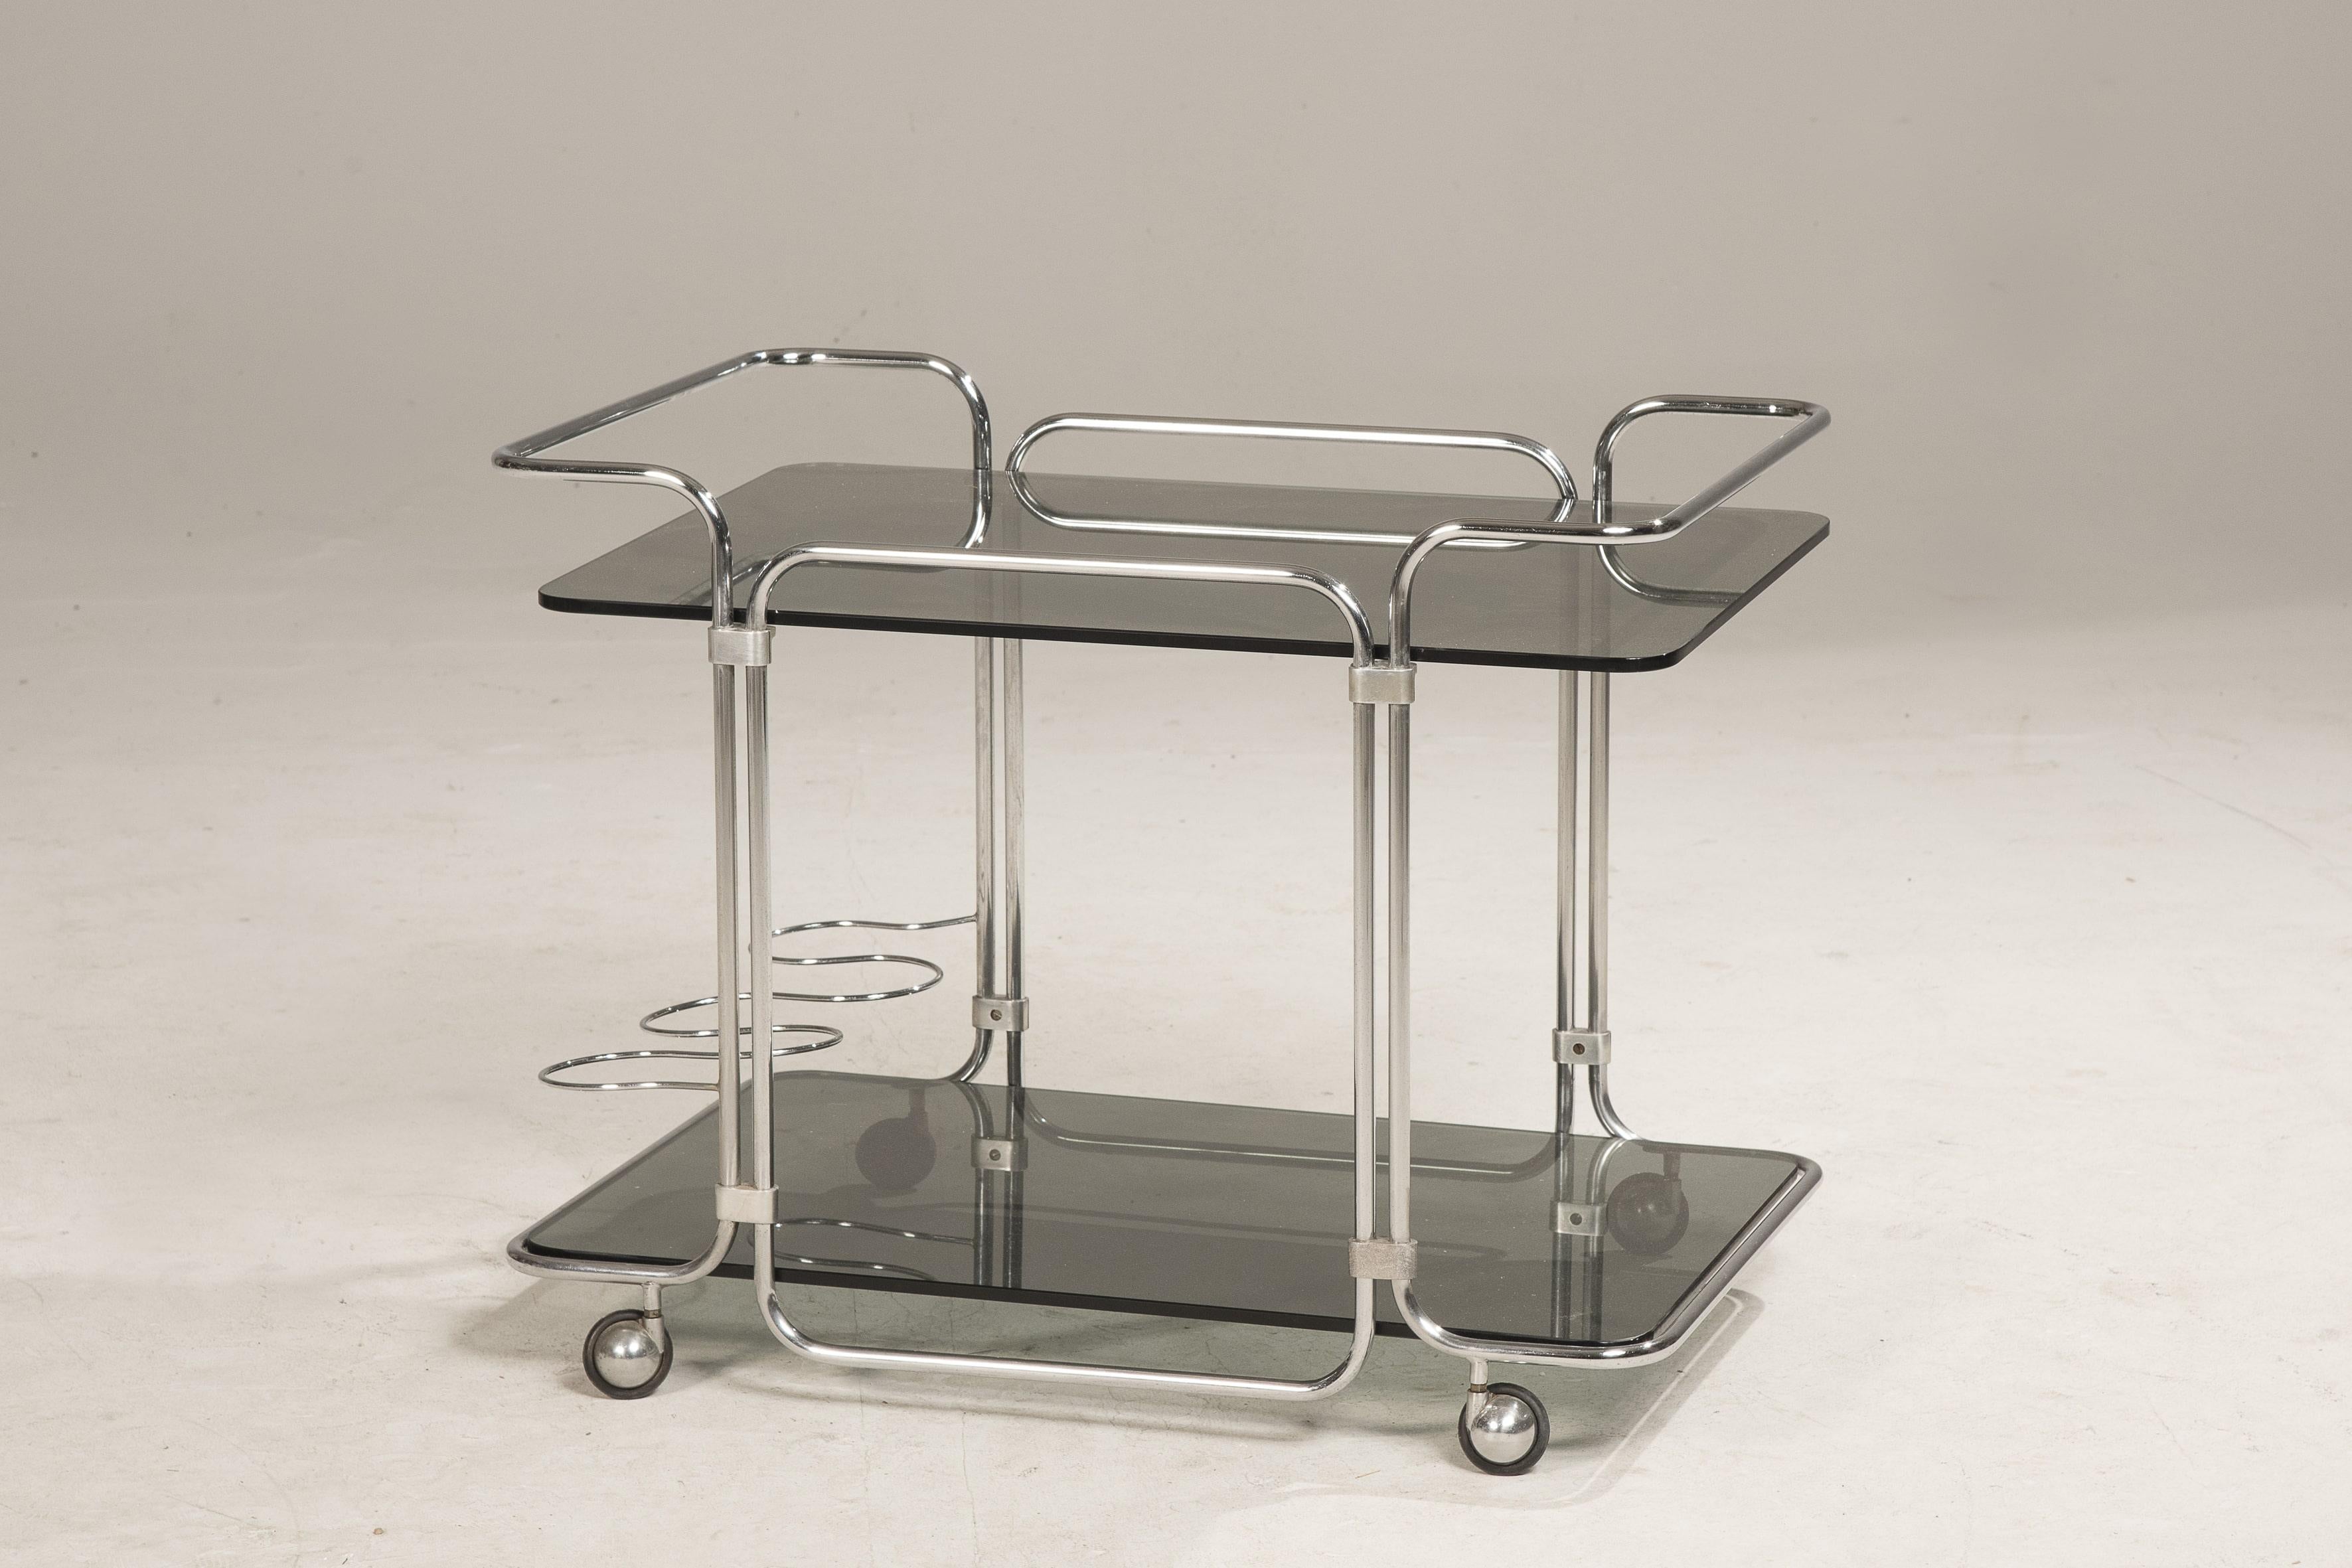 1970s steel wheeled two smoked glass shelves cart with steel bottles holder.
No restoration needed.